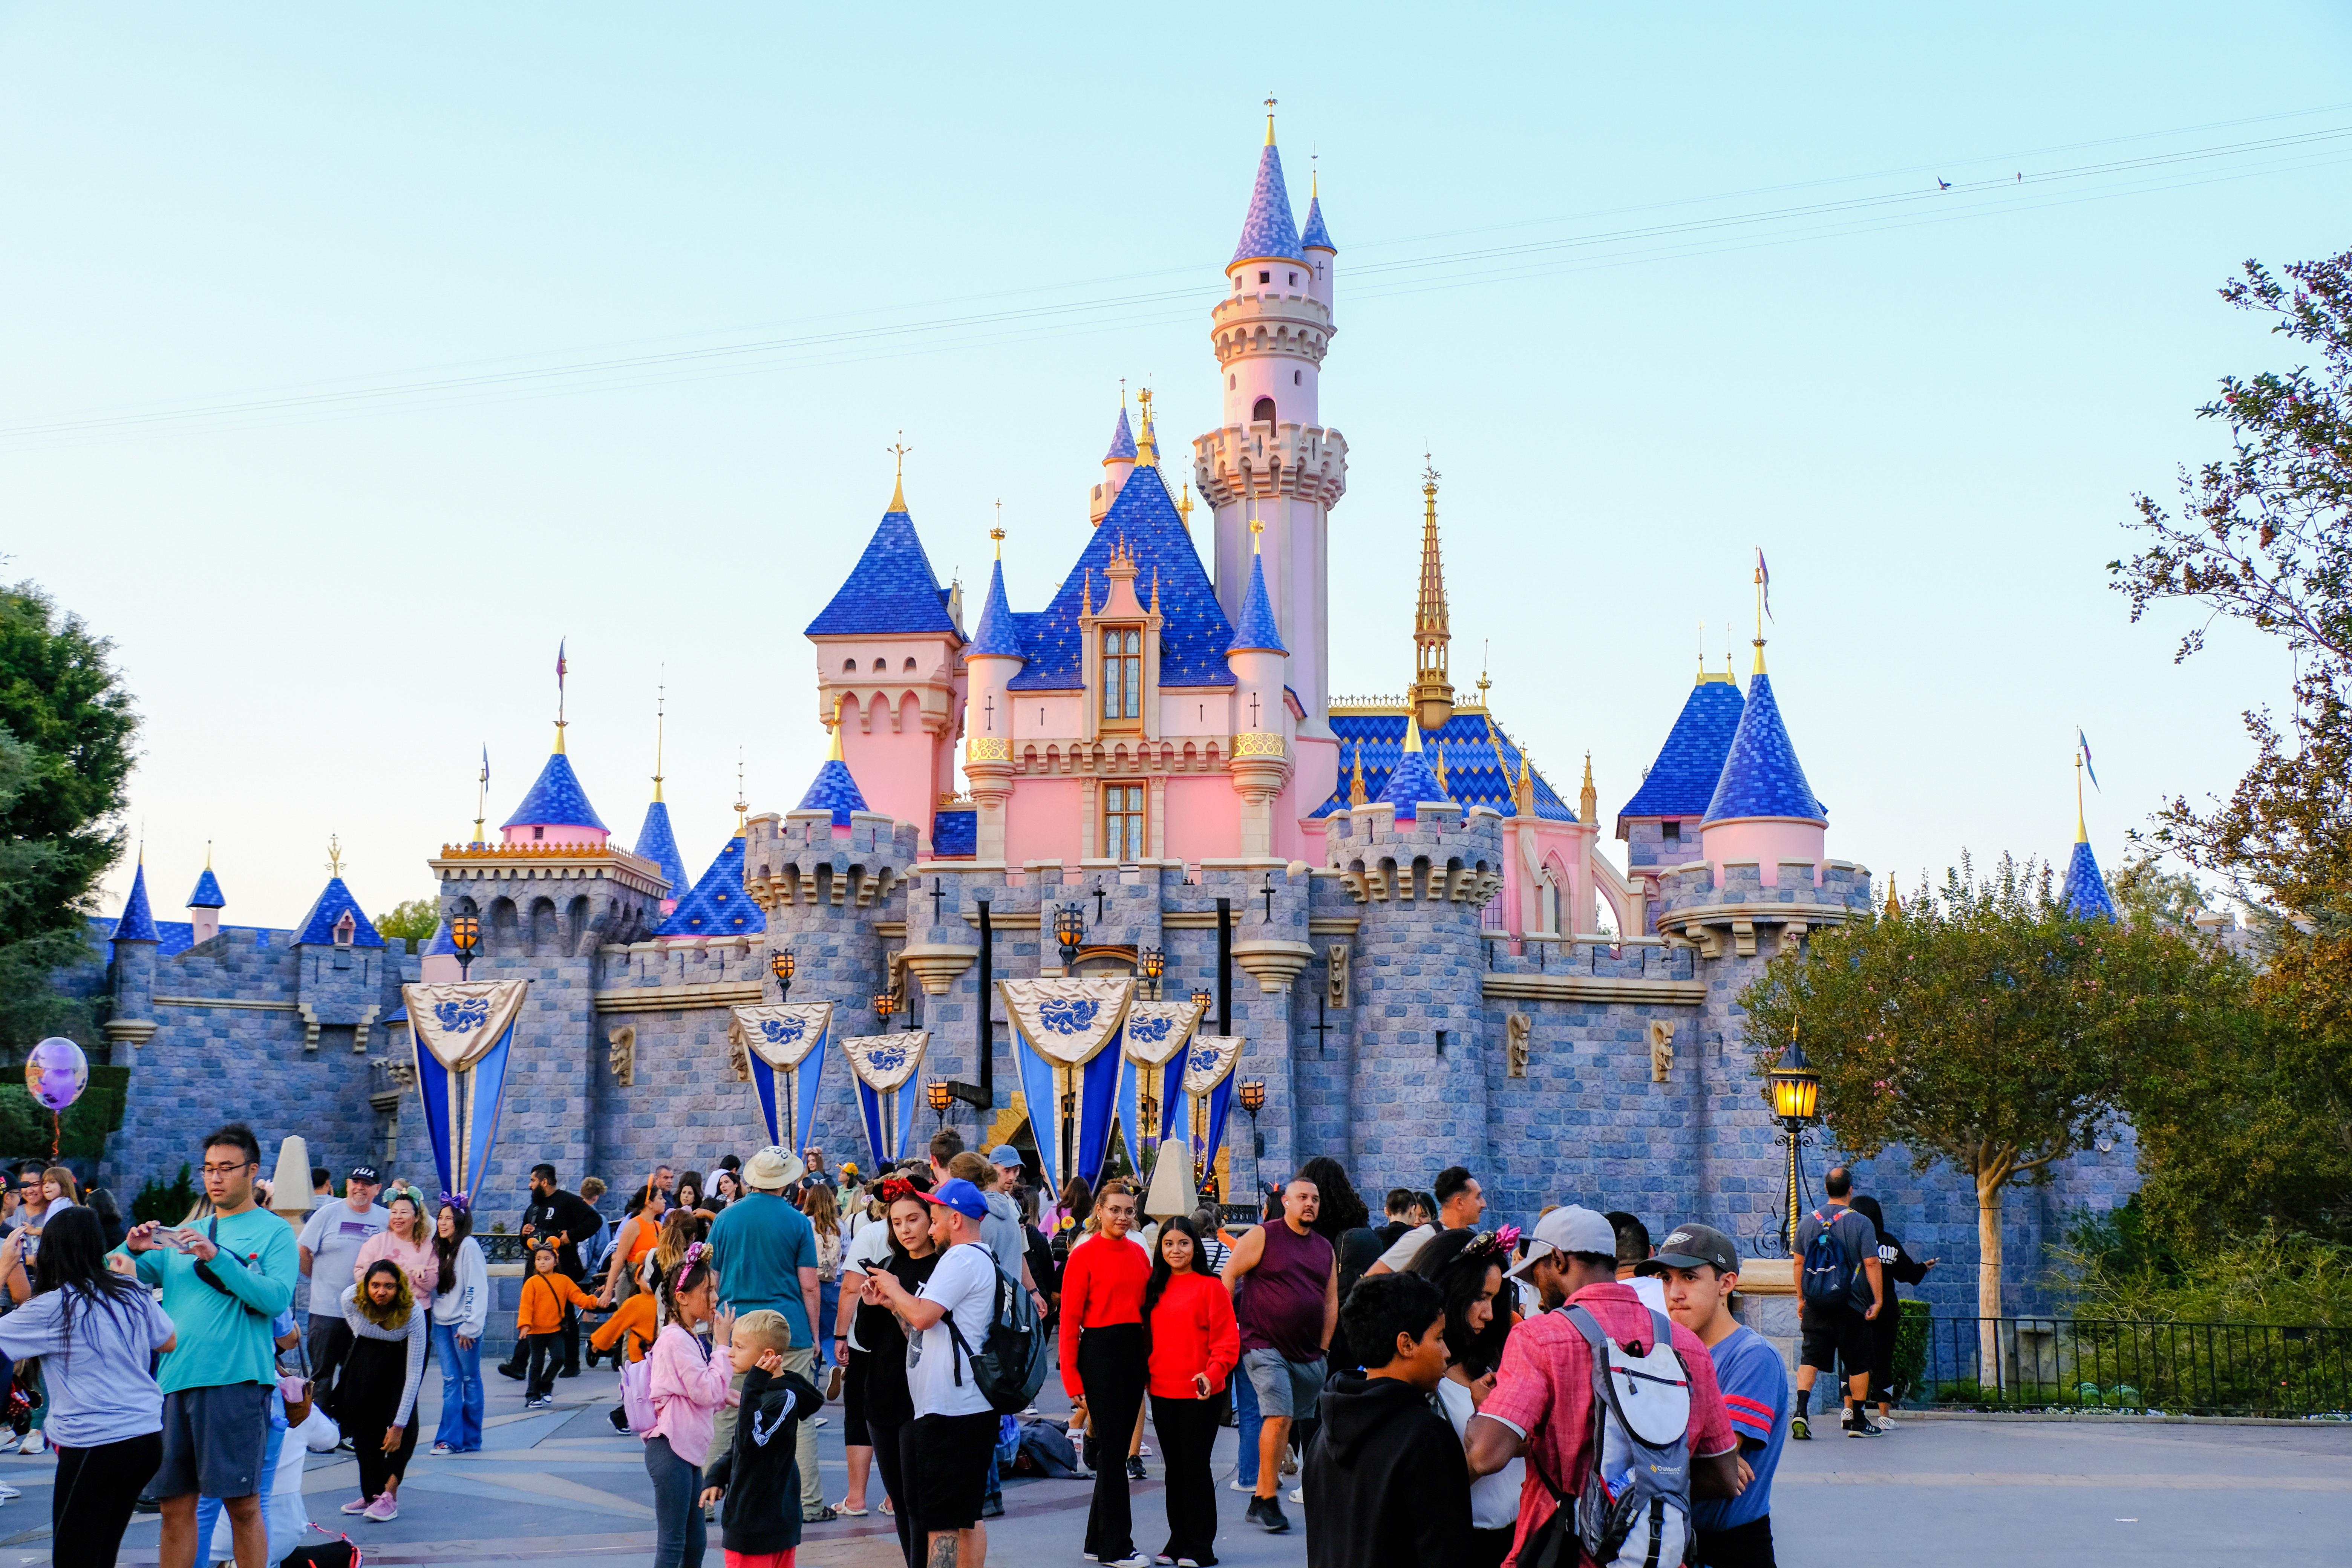 Sun Protection at Disneyland: How to keep the Entire Family Safe